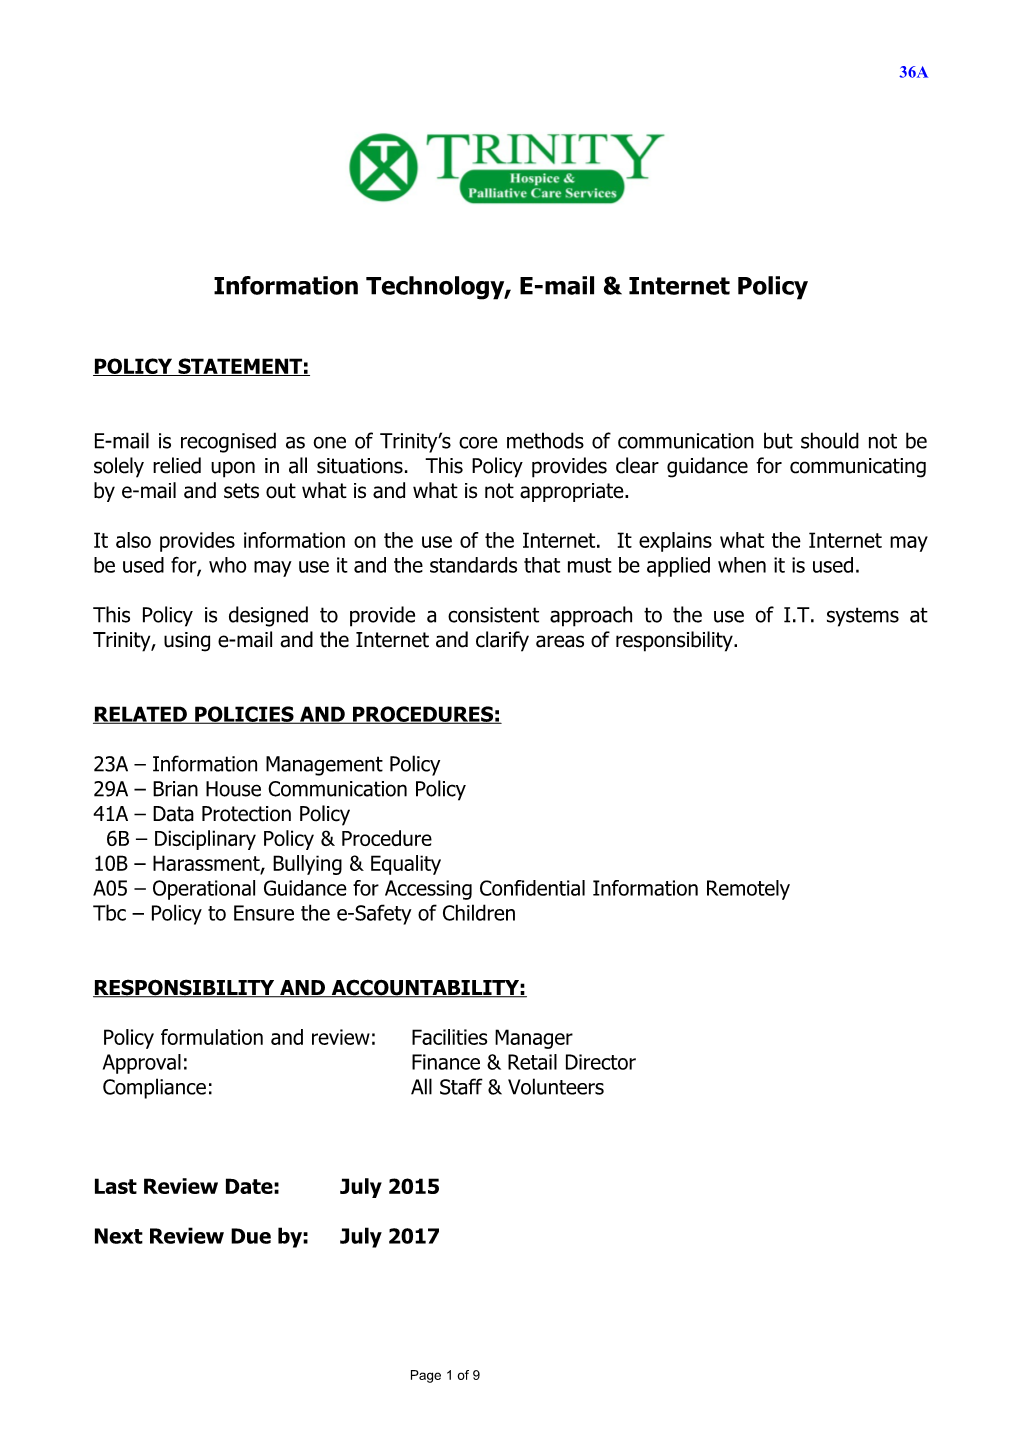 Information Technology, E-Mail & Internet Policy